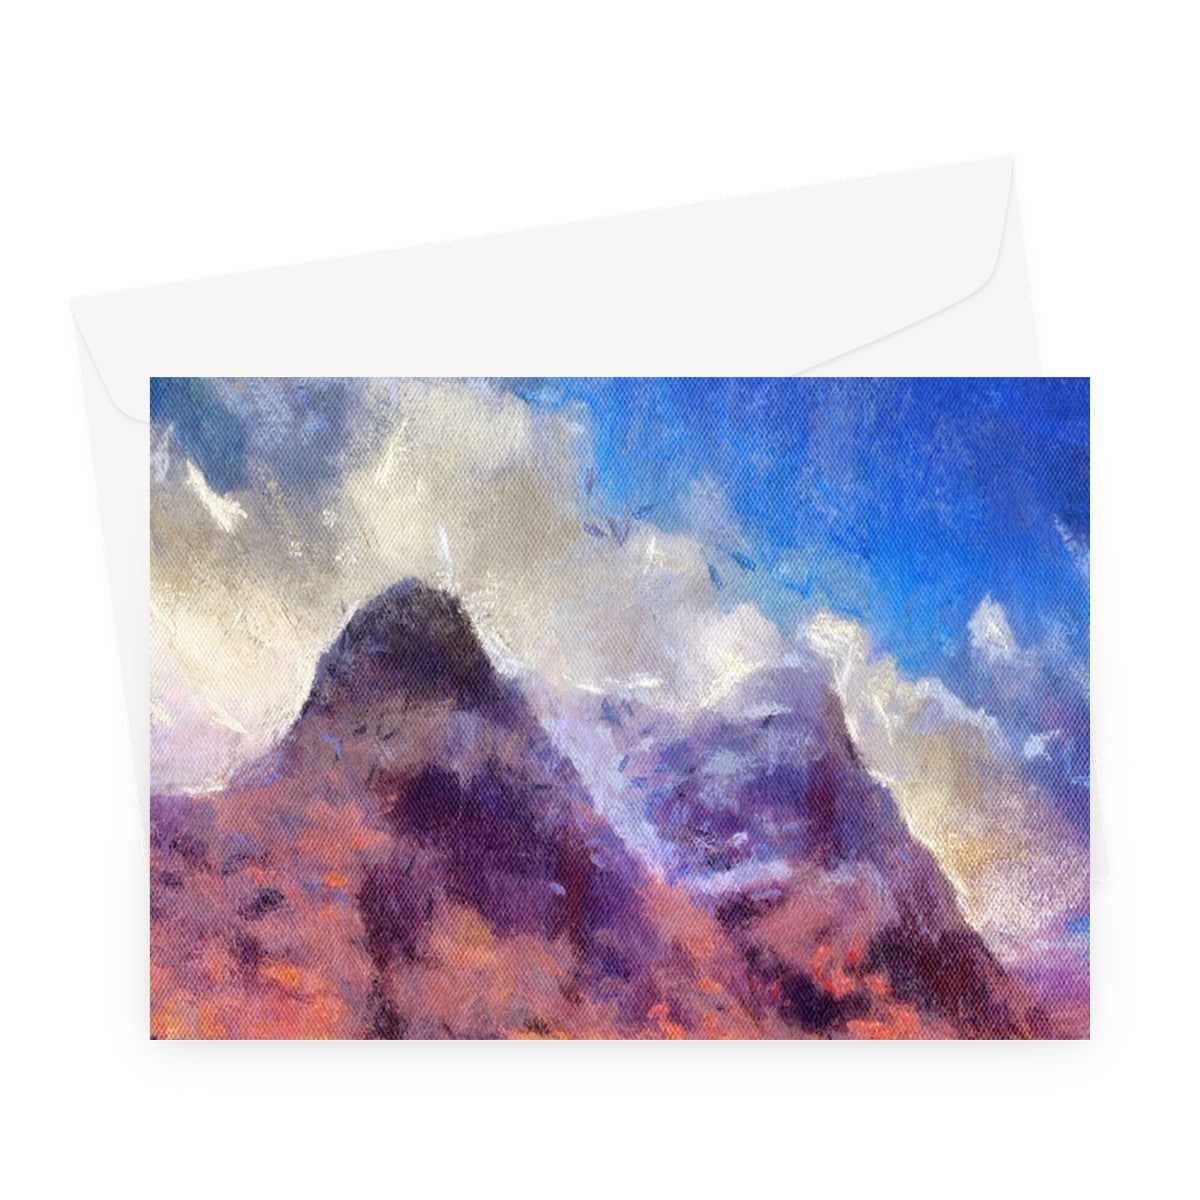 Glencoe Art Gifts Greeting Card-Greetings Cards-Glencoe Art Gallery-A5 Landscape-10 Cards-Paintings, Prints, Homeware, Art Gifts From Scotland By Scottish Artist Kevin Hunter